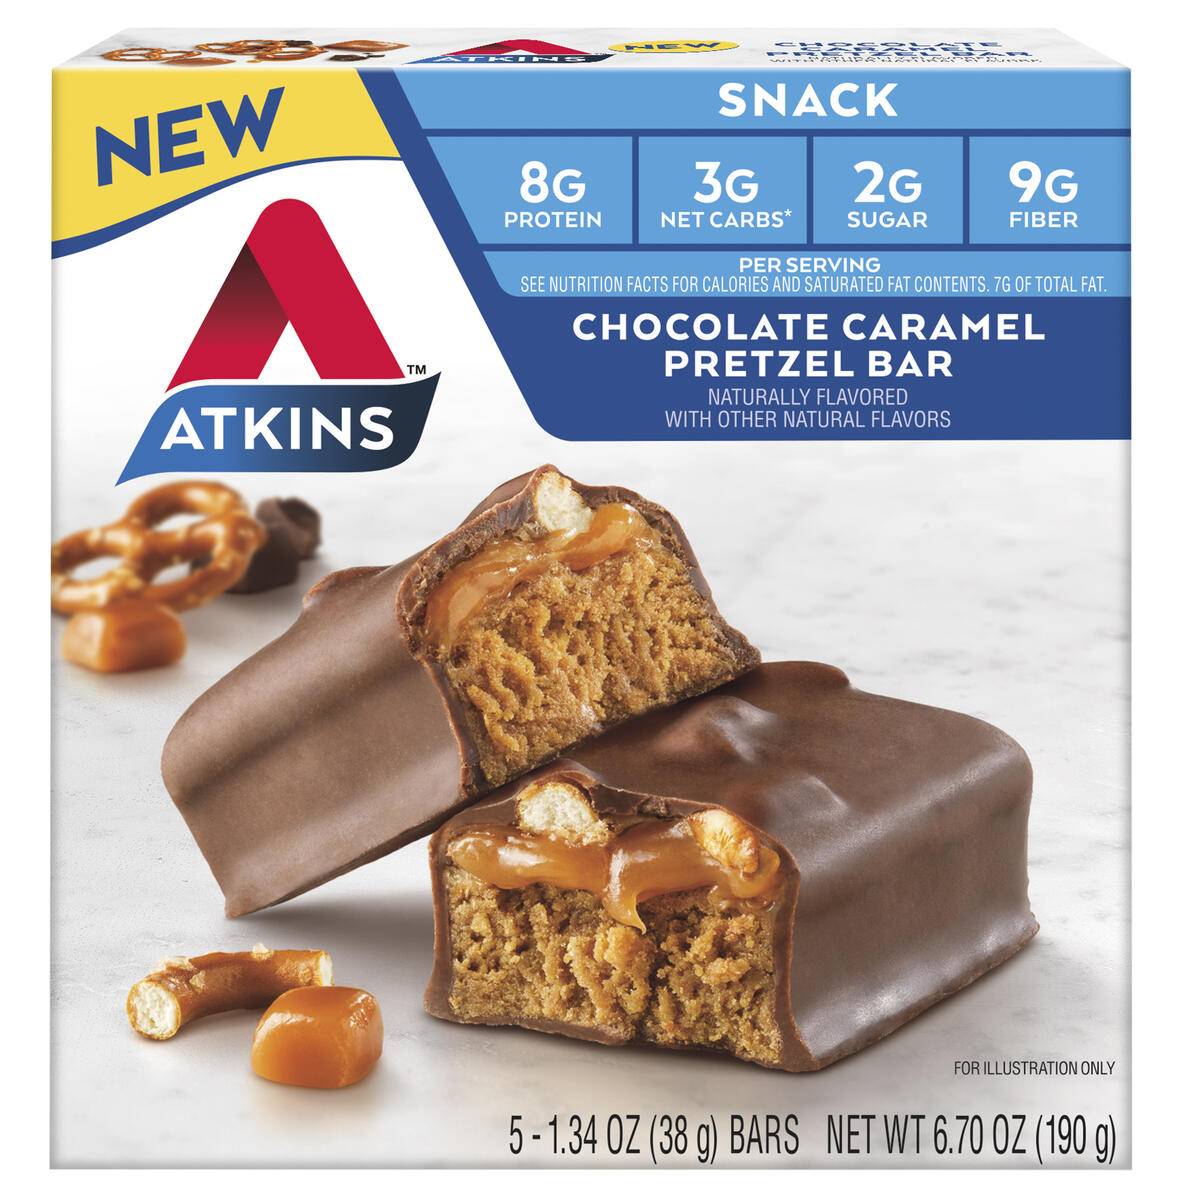 Good Measure Bars, Almond Butter & Dark Chocolate - 4G Net Carbs, 8g Protein - Nutrient-Rich Low Carb Snack, Keto Friendly Food - Little Impact on